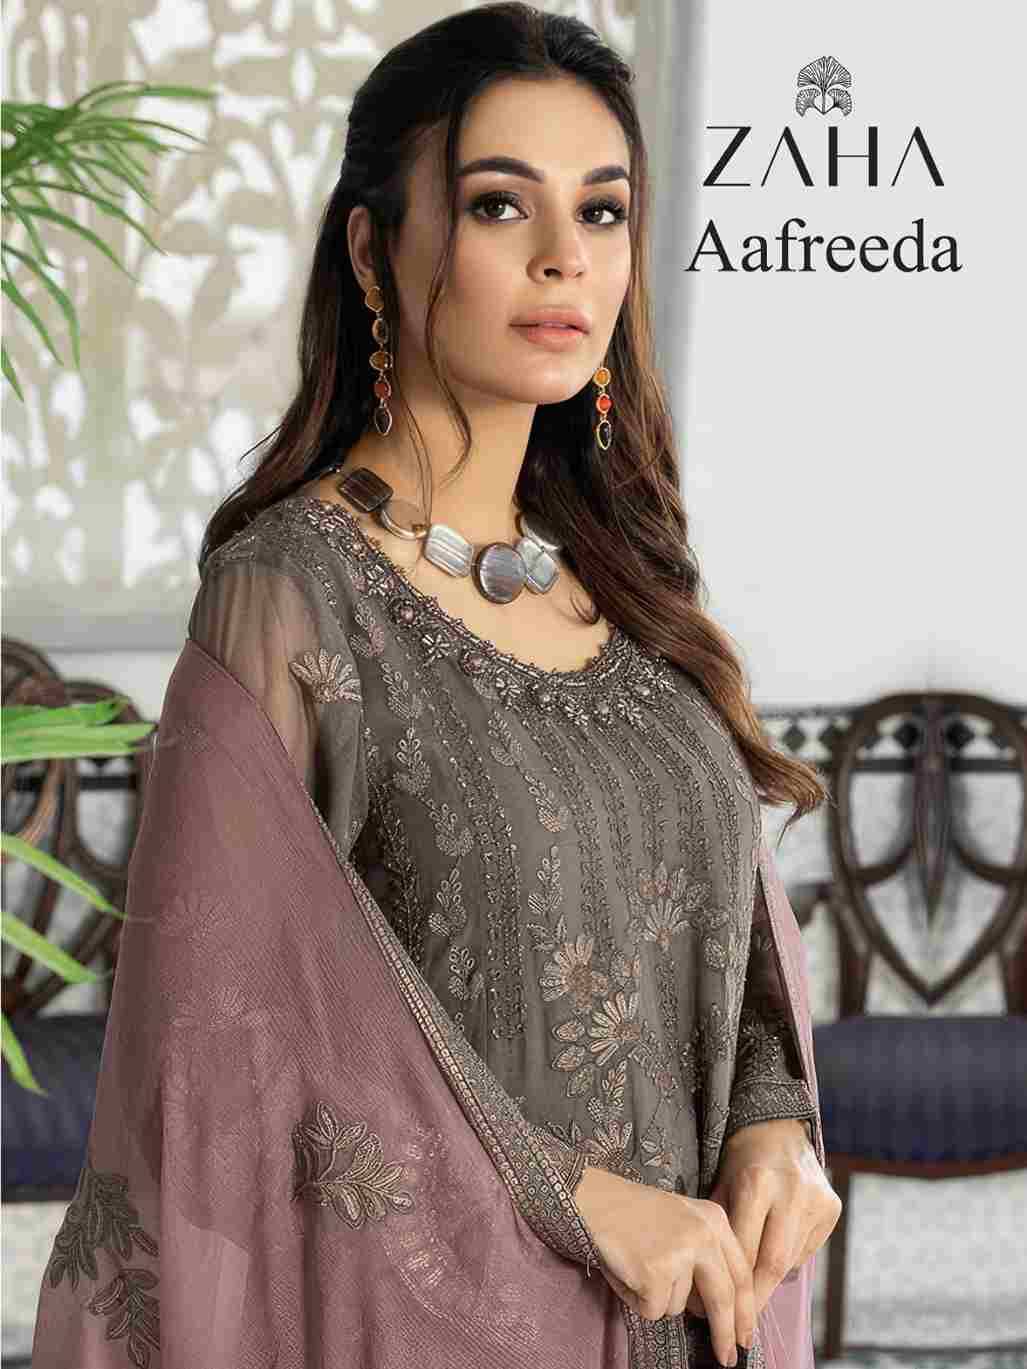 Aafreeda By Zaha 10256 To 10258 Series Designer Pakistani Suits Beautiful Stylish Fancy Colorful Party Wear & Occasional Wear Faux Georgette With Embroidery Dresses At Wholesale Price